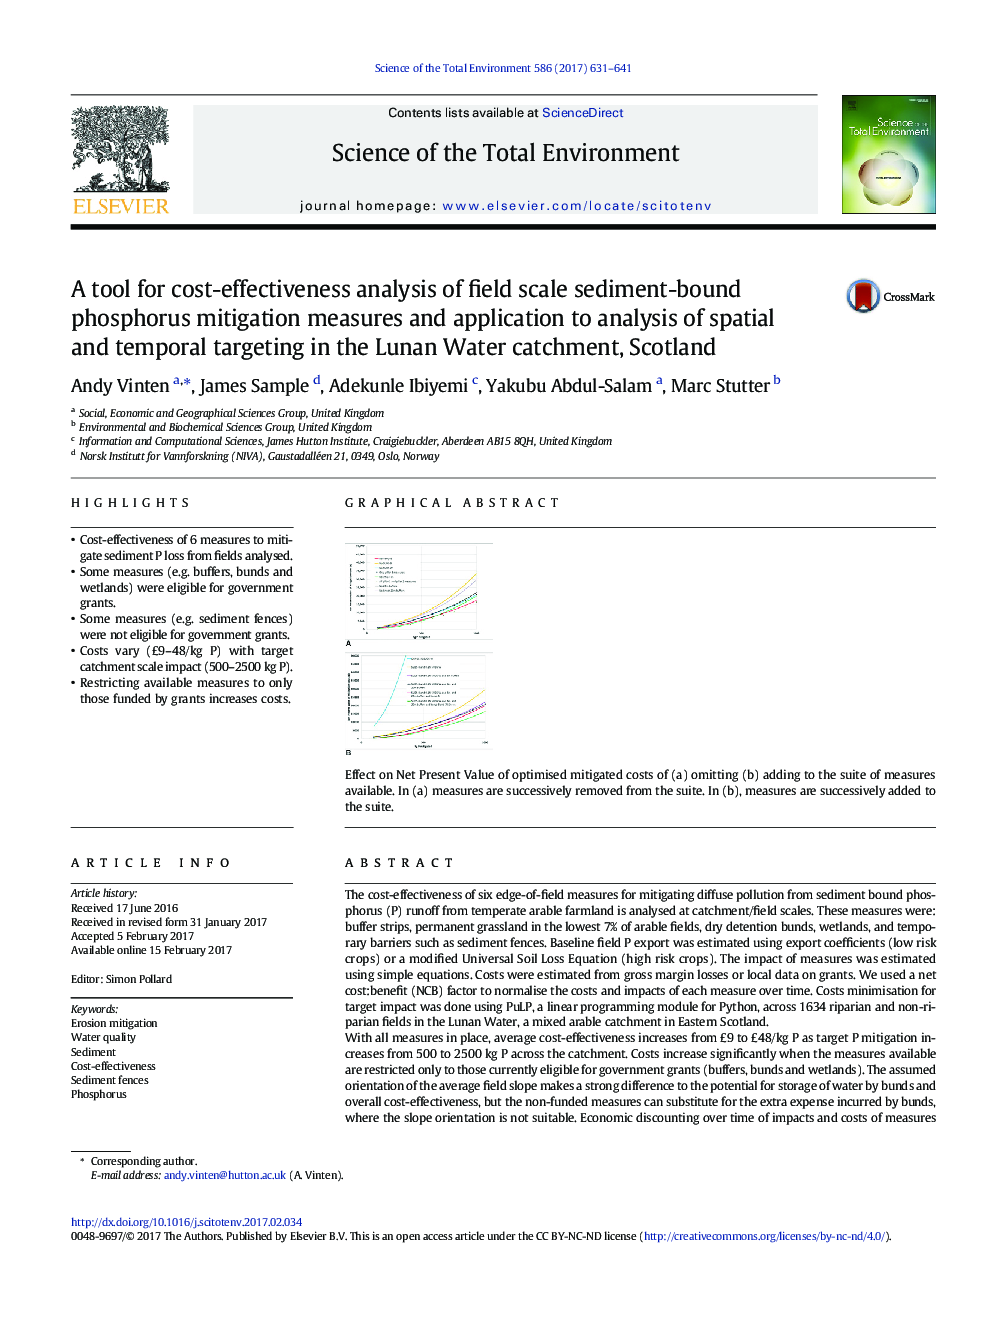 A tool for cost-effectiveness analysis of field scale sediment-bound phosphorus mitigation measures and application to analysis of spatial and temporal targeting in the Lunan Water catchment, Scotland